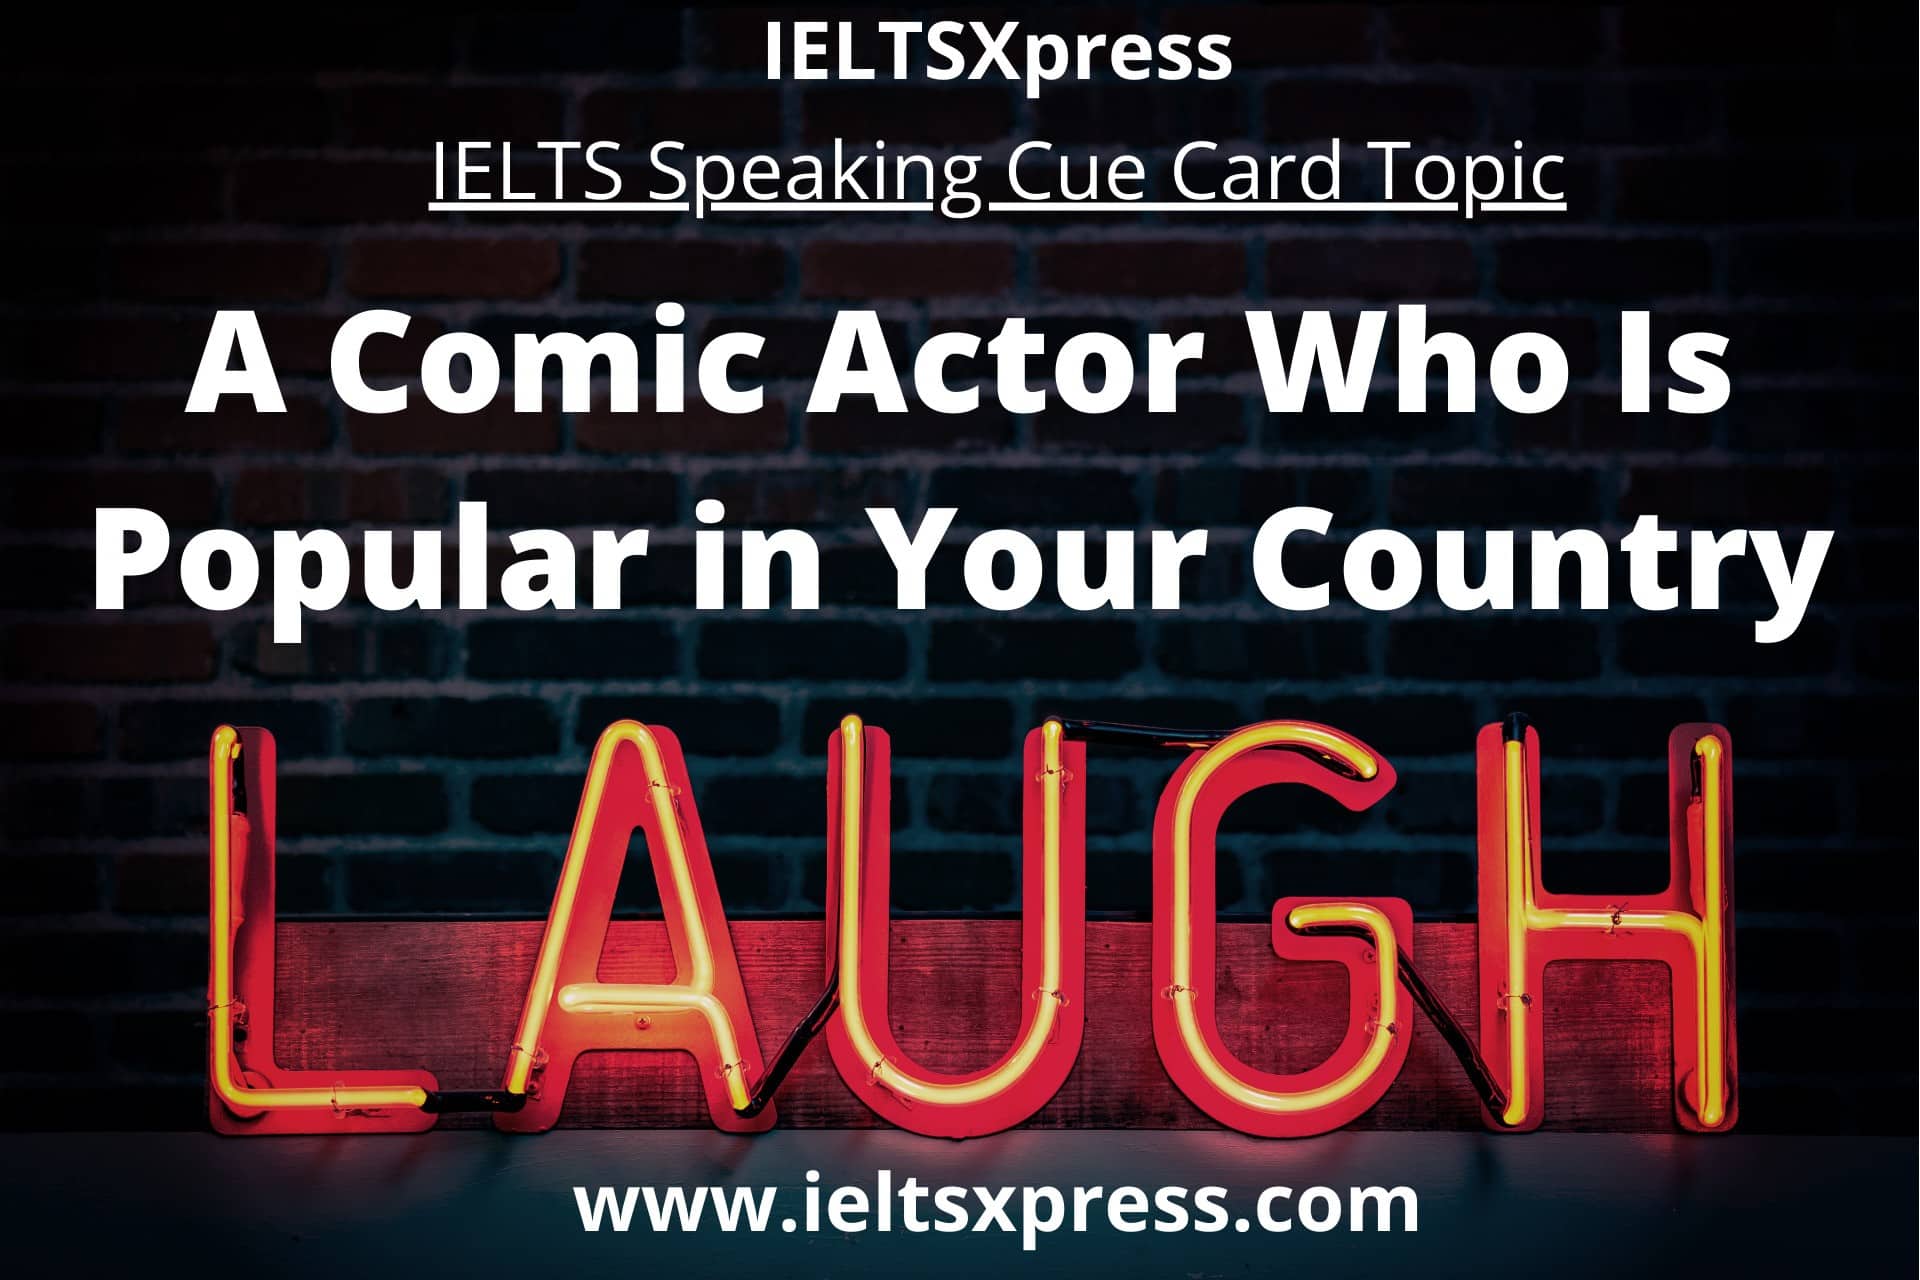 A Comic Actor Who is Popular in Your Country